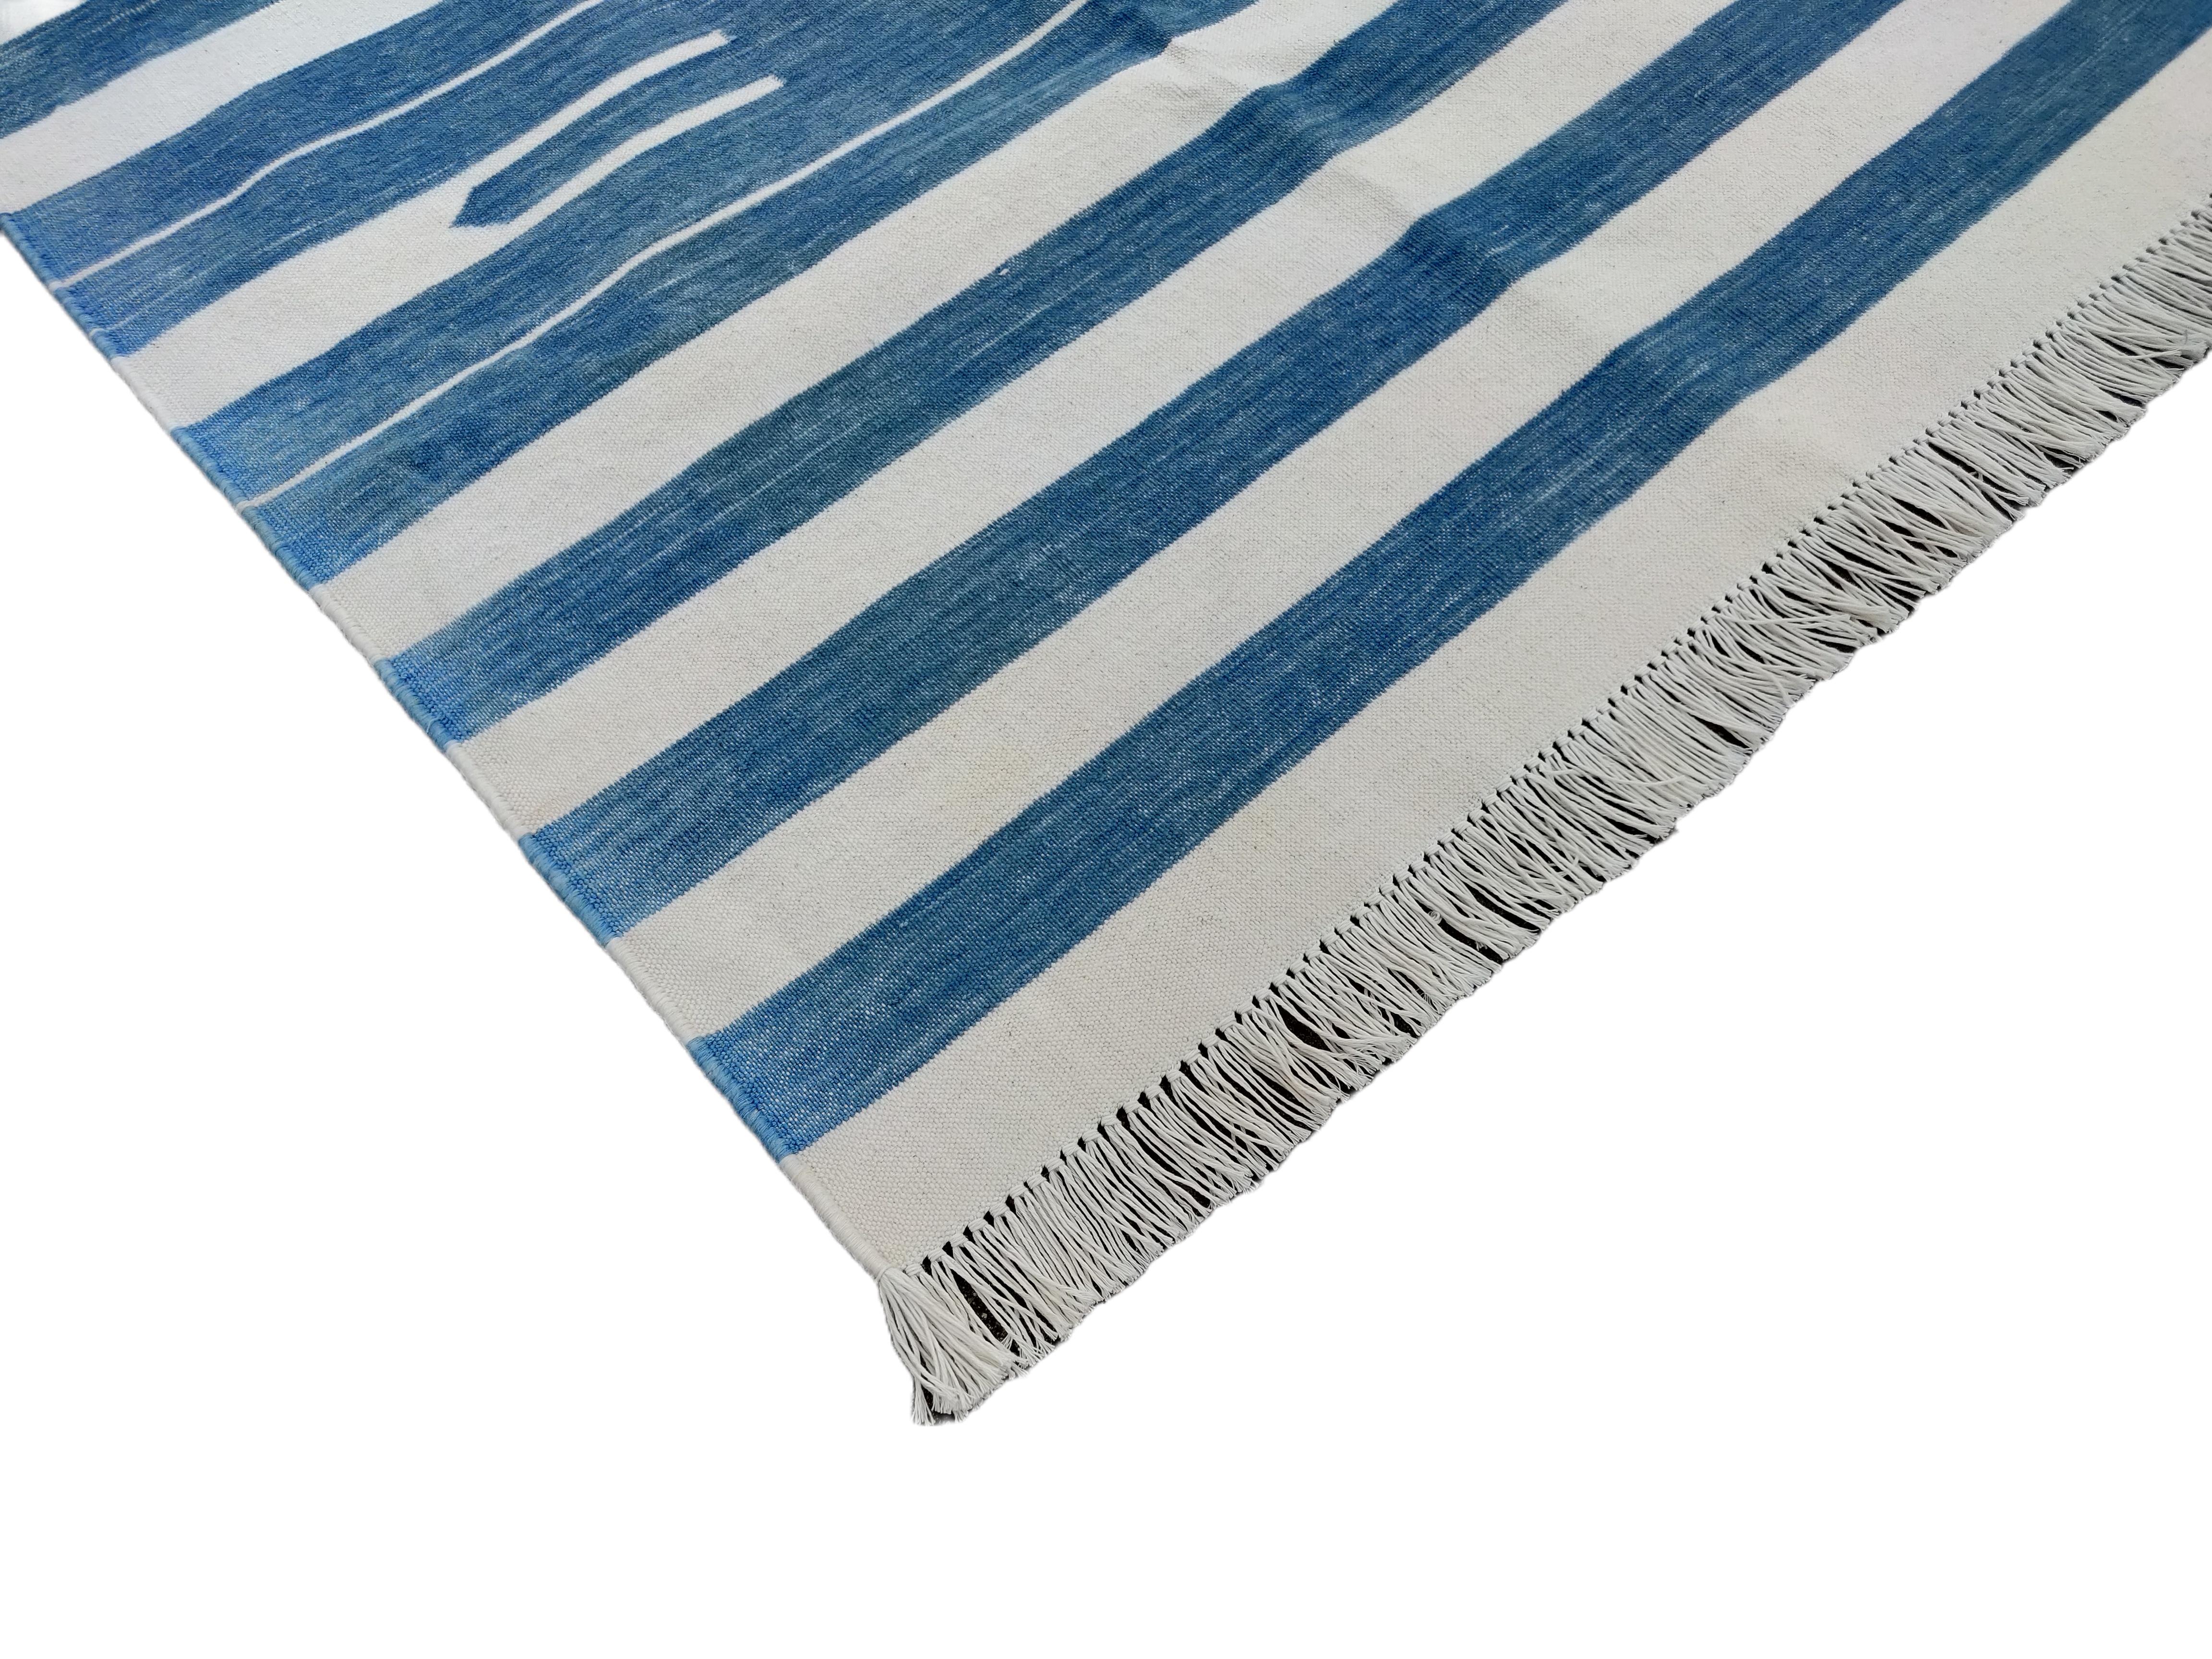 Contemporary Handmade Cotton Area Flat Weave Runner, 3x12 Blue And White Striped Dhurrie Rug For Sale